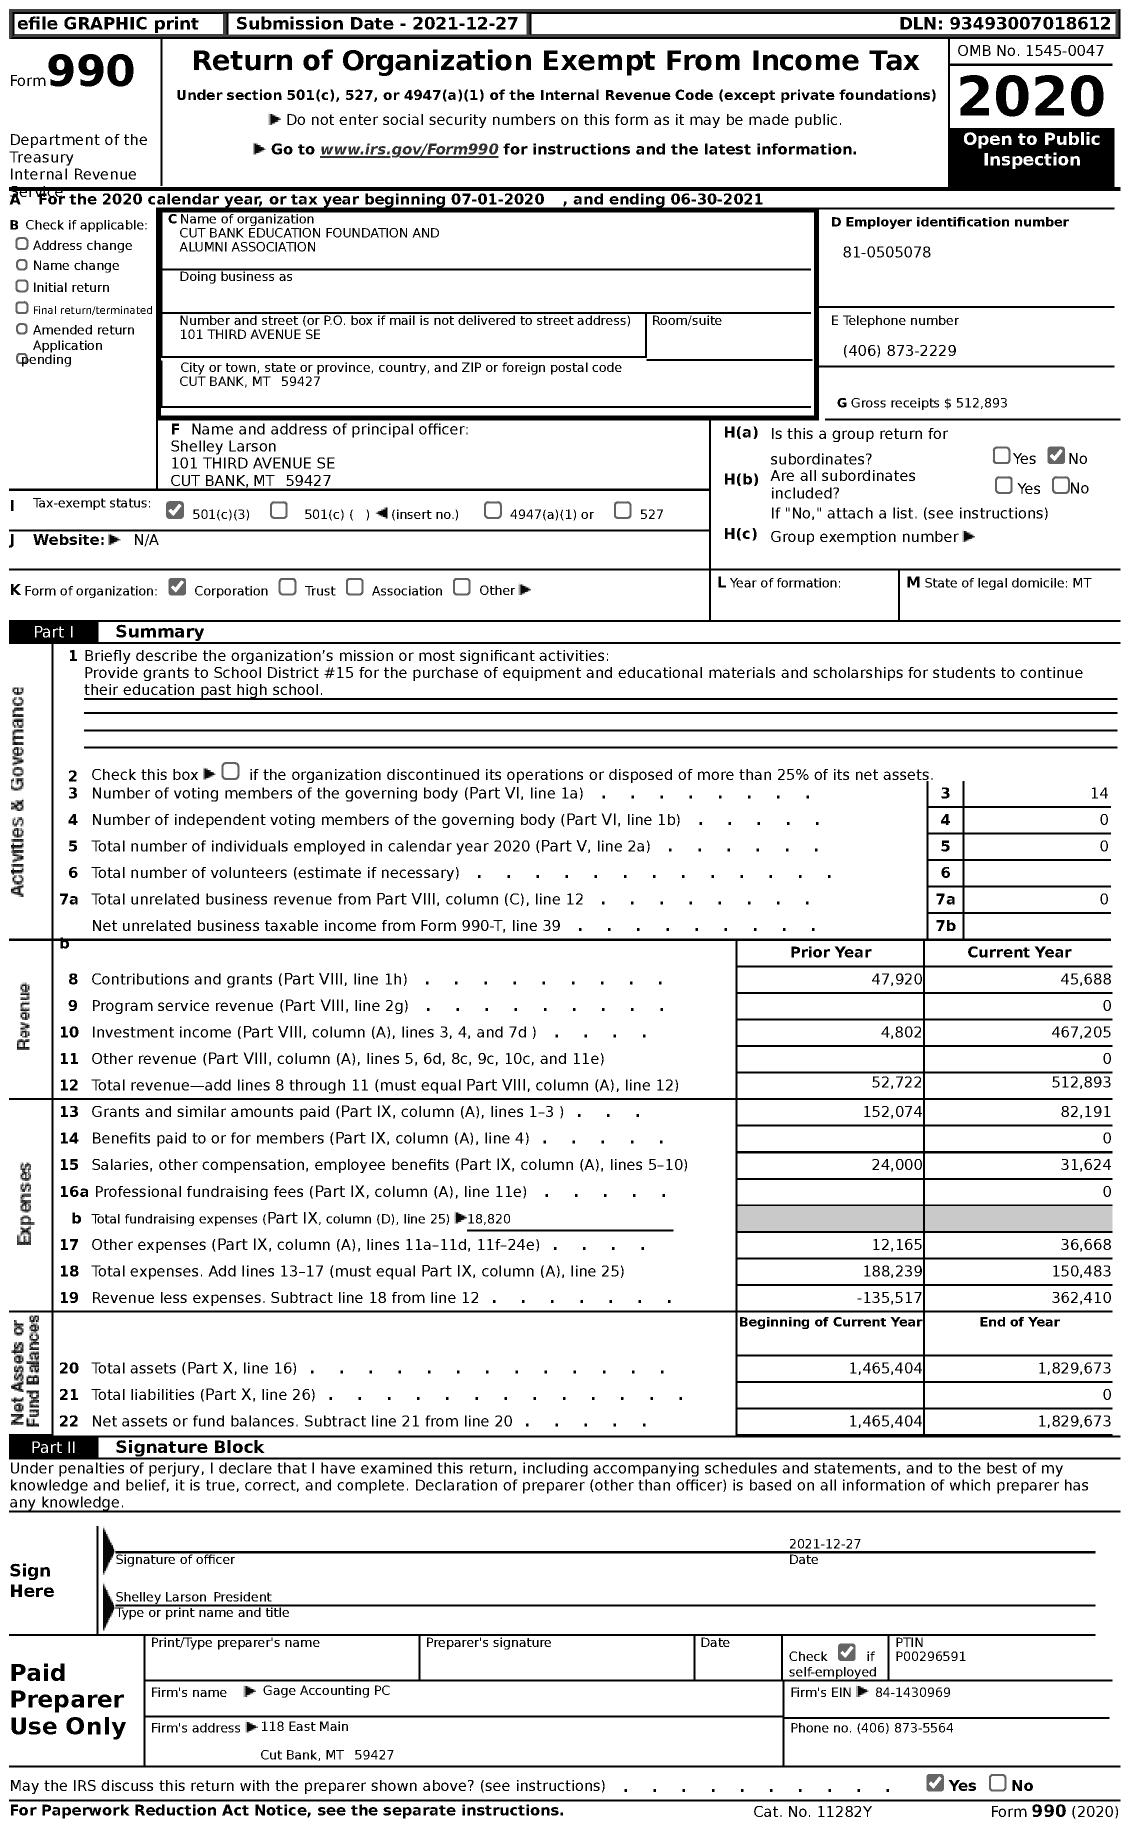 Image of first page of 2020 Form 990 for Cut Bank Education Foundation and Alumni Association